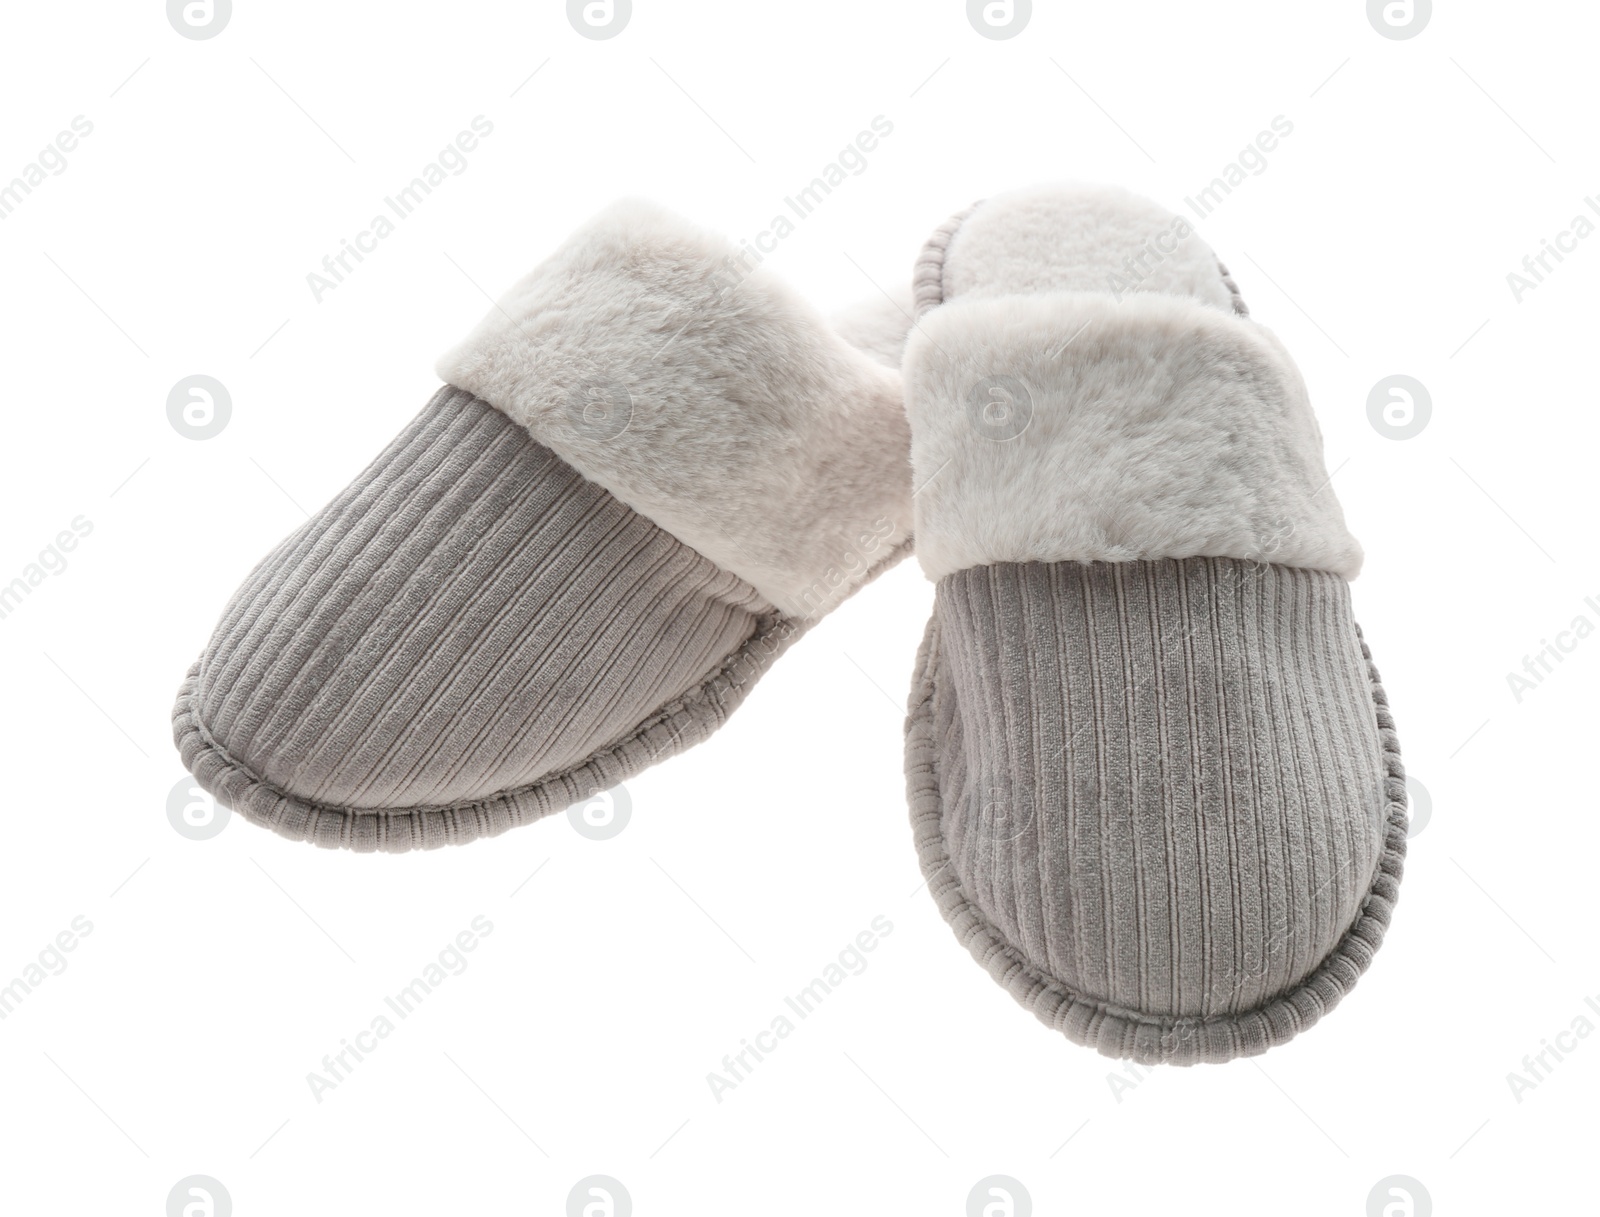 Photo of Pair of soft closed toe slippers on white background